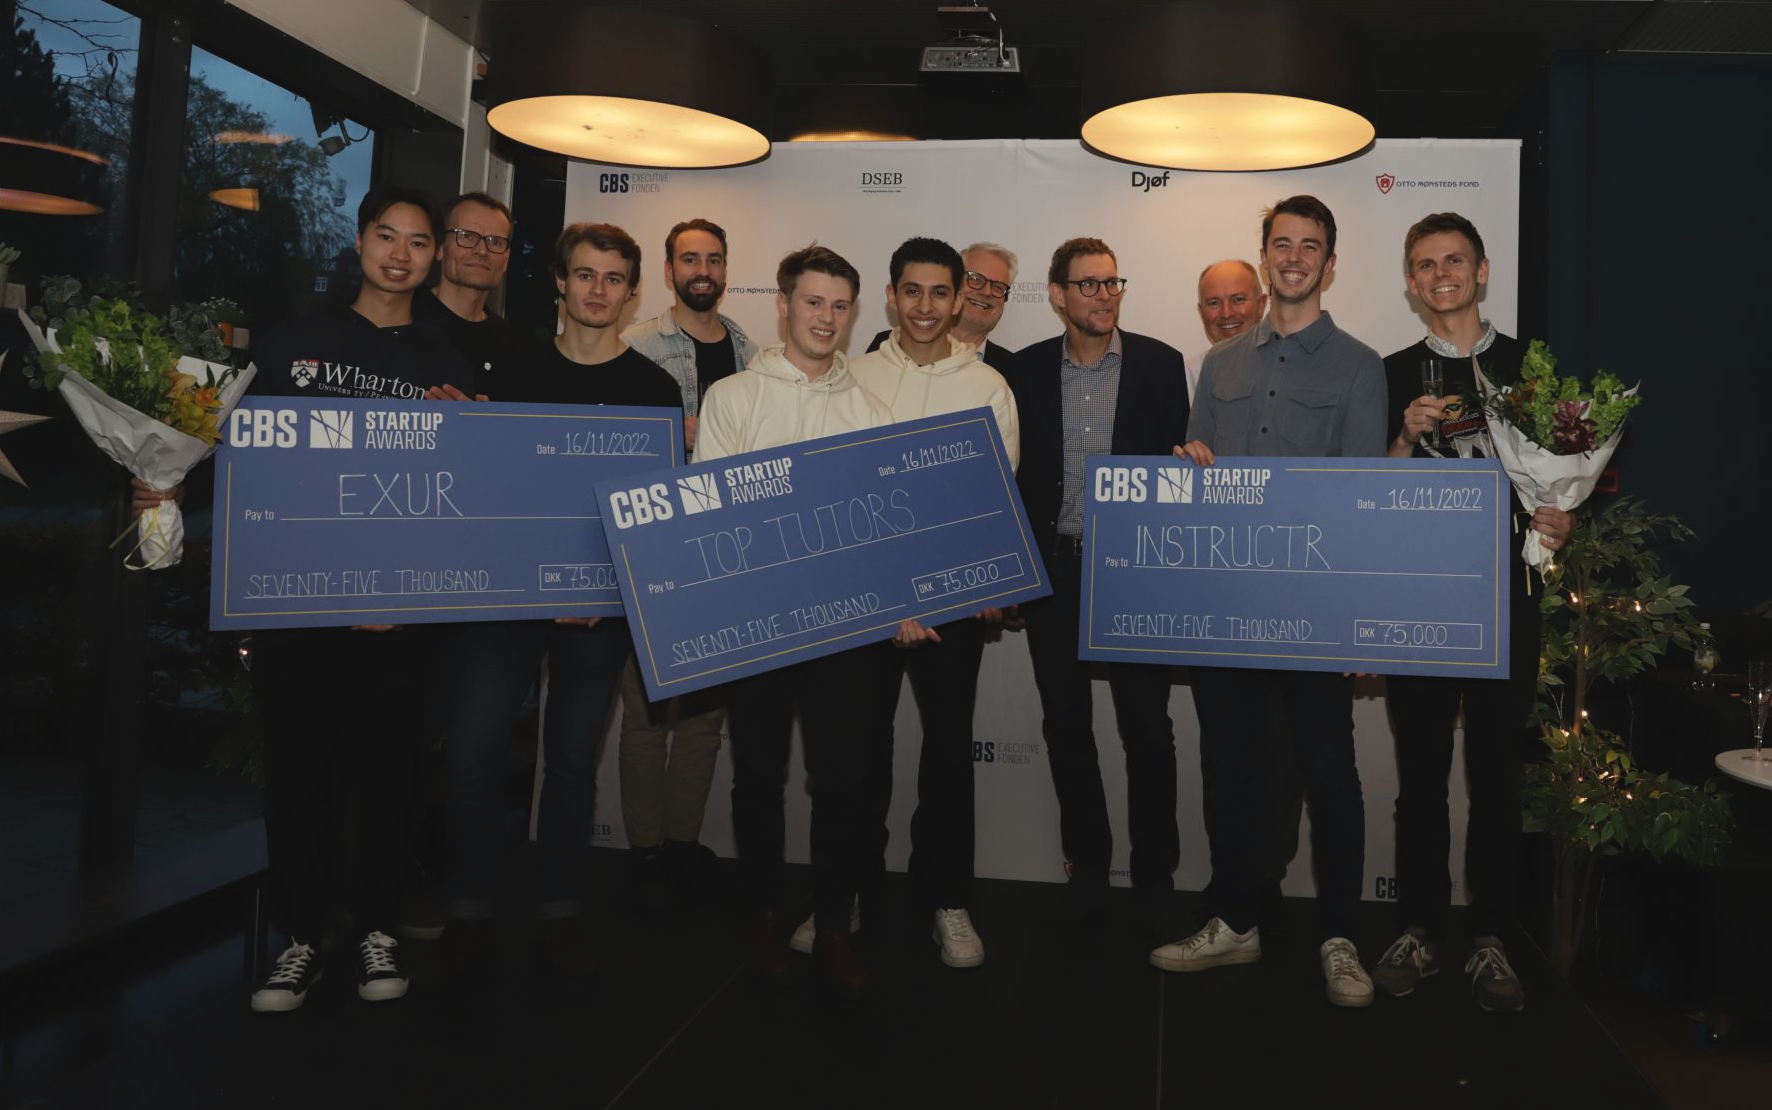 Cover Image for Exur wins the CBS Startup Grant